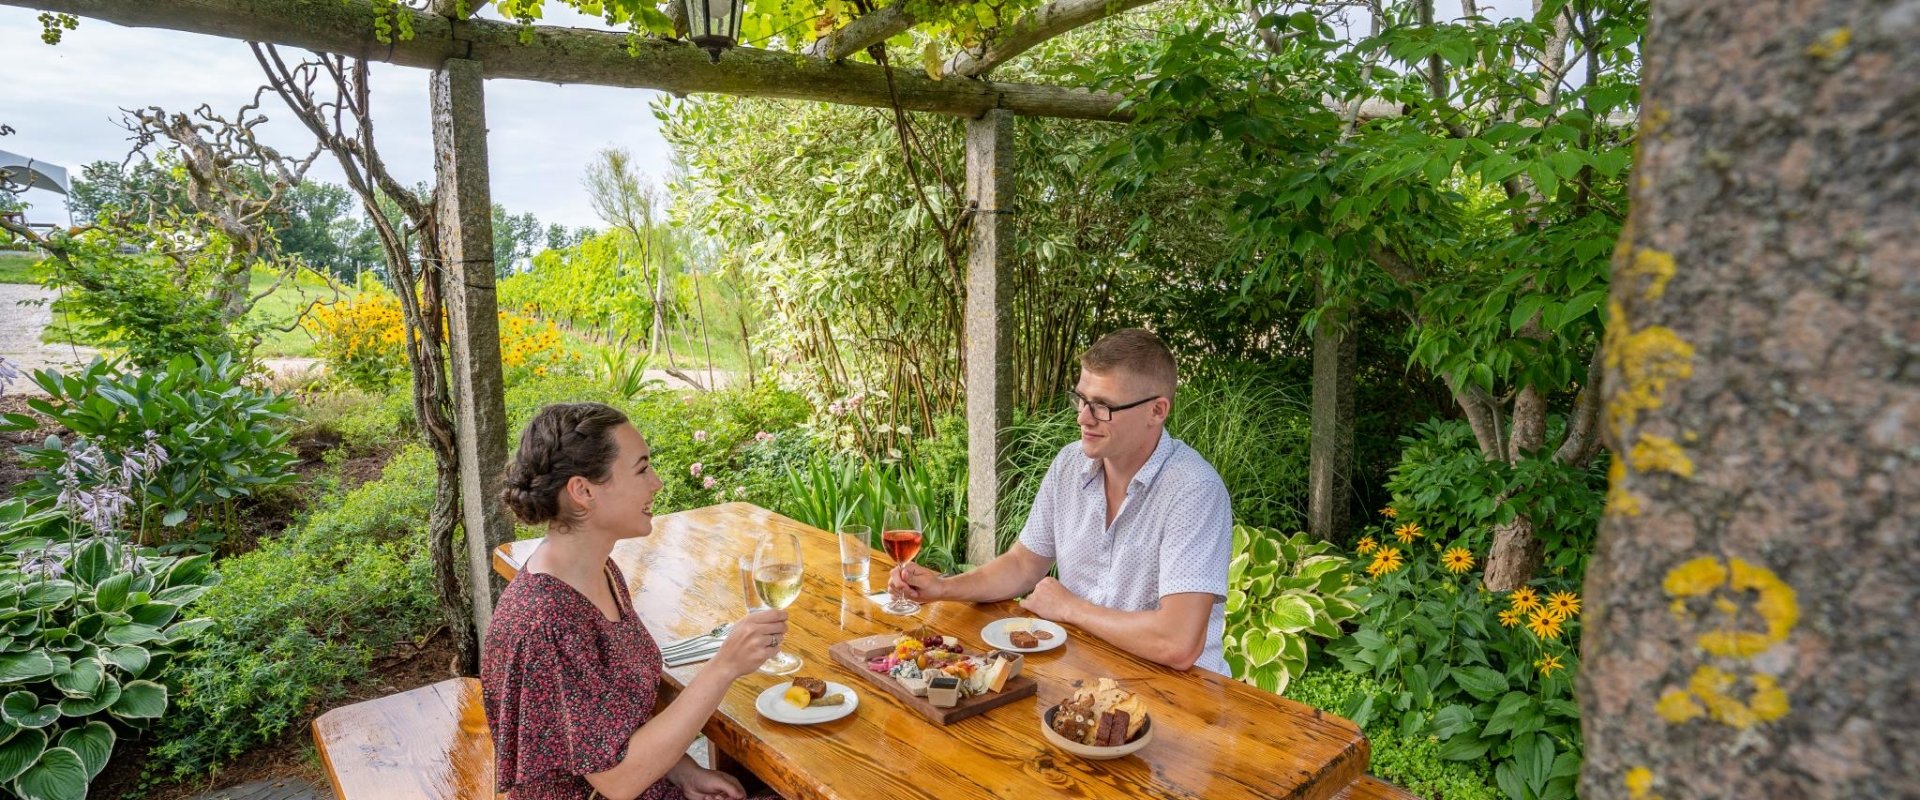 Two people enjoying lunch and wine at a picnic table surrounded by plants and greenery.